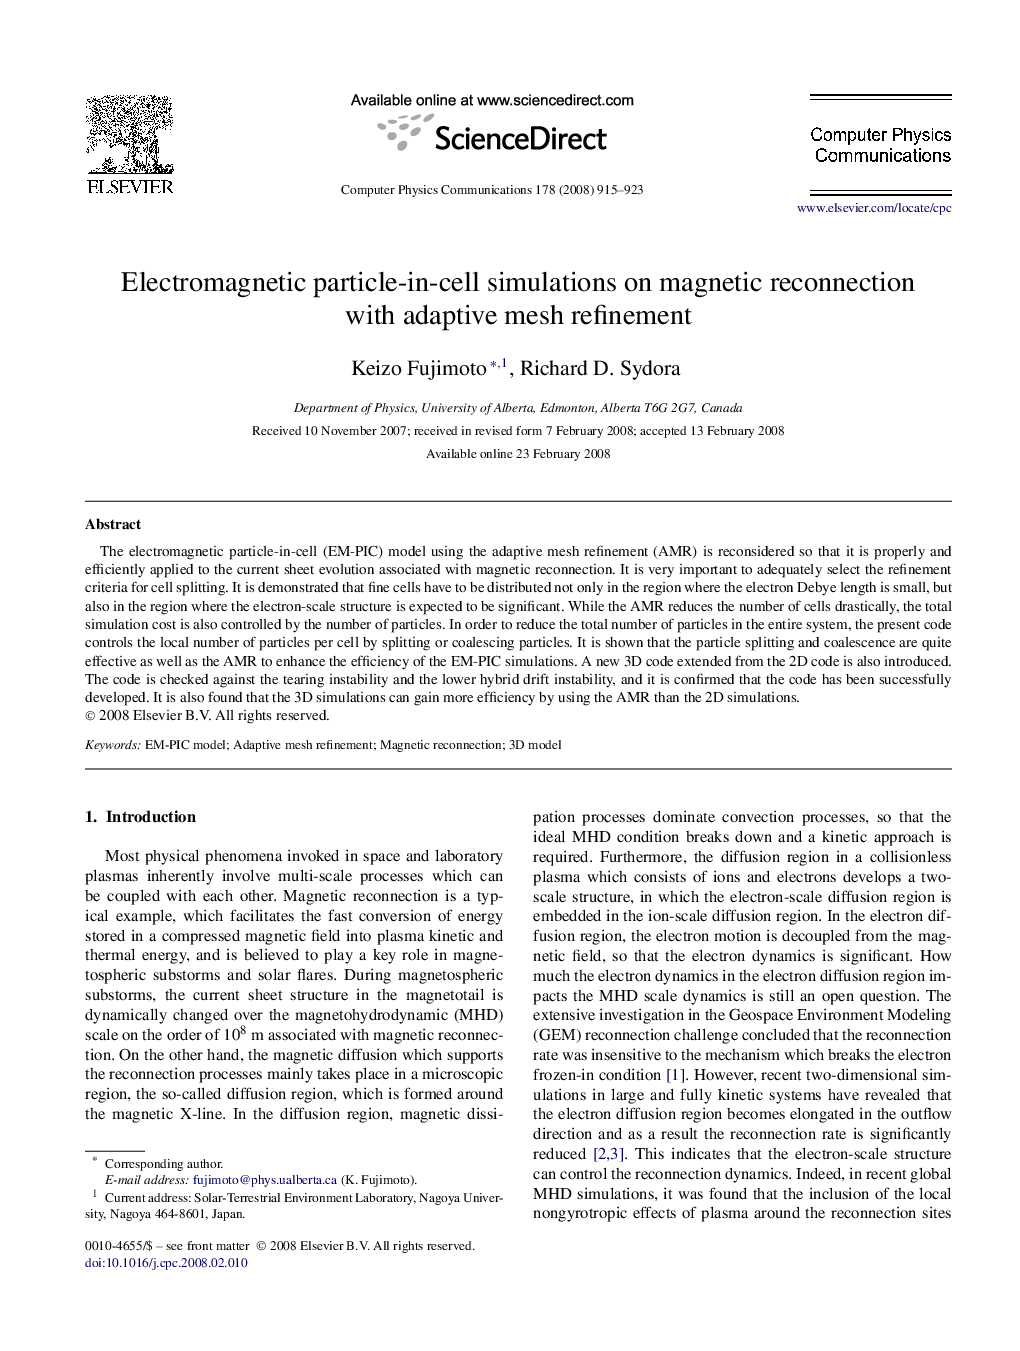 Electromagnetic particle-in-cell simulations on magnetic reconnection with adaptive mesh refinement